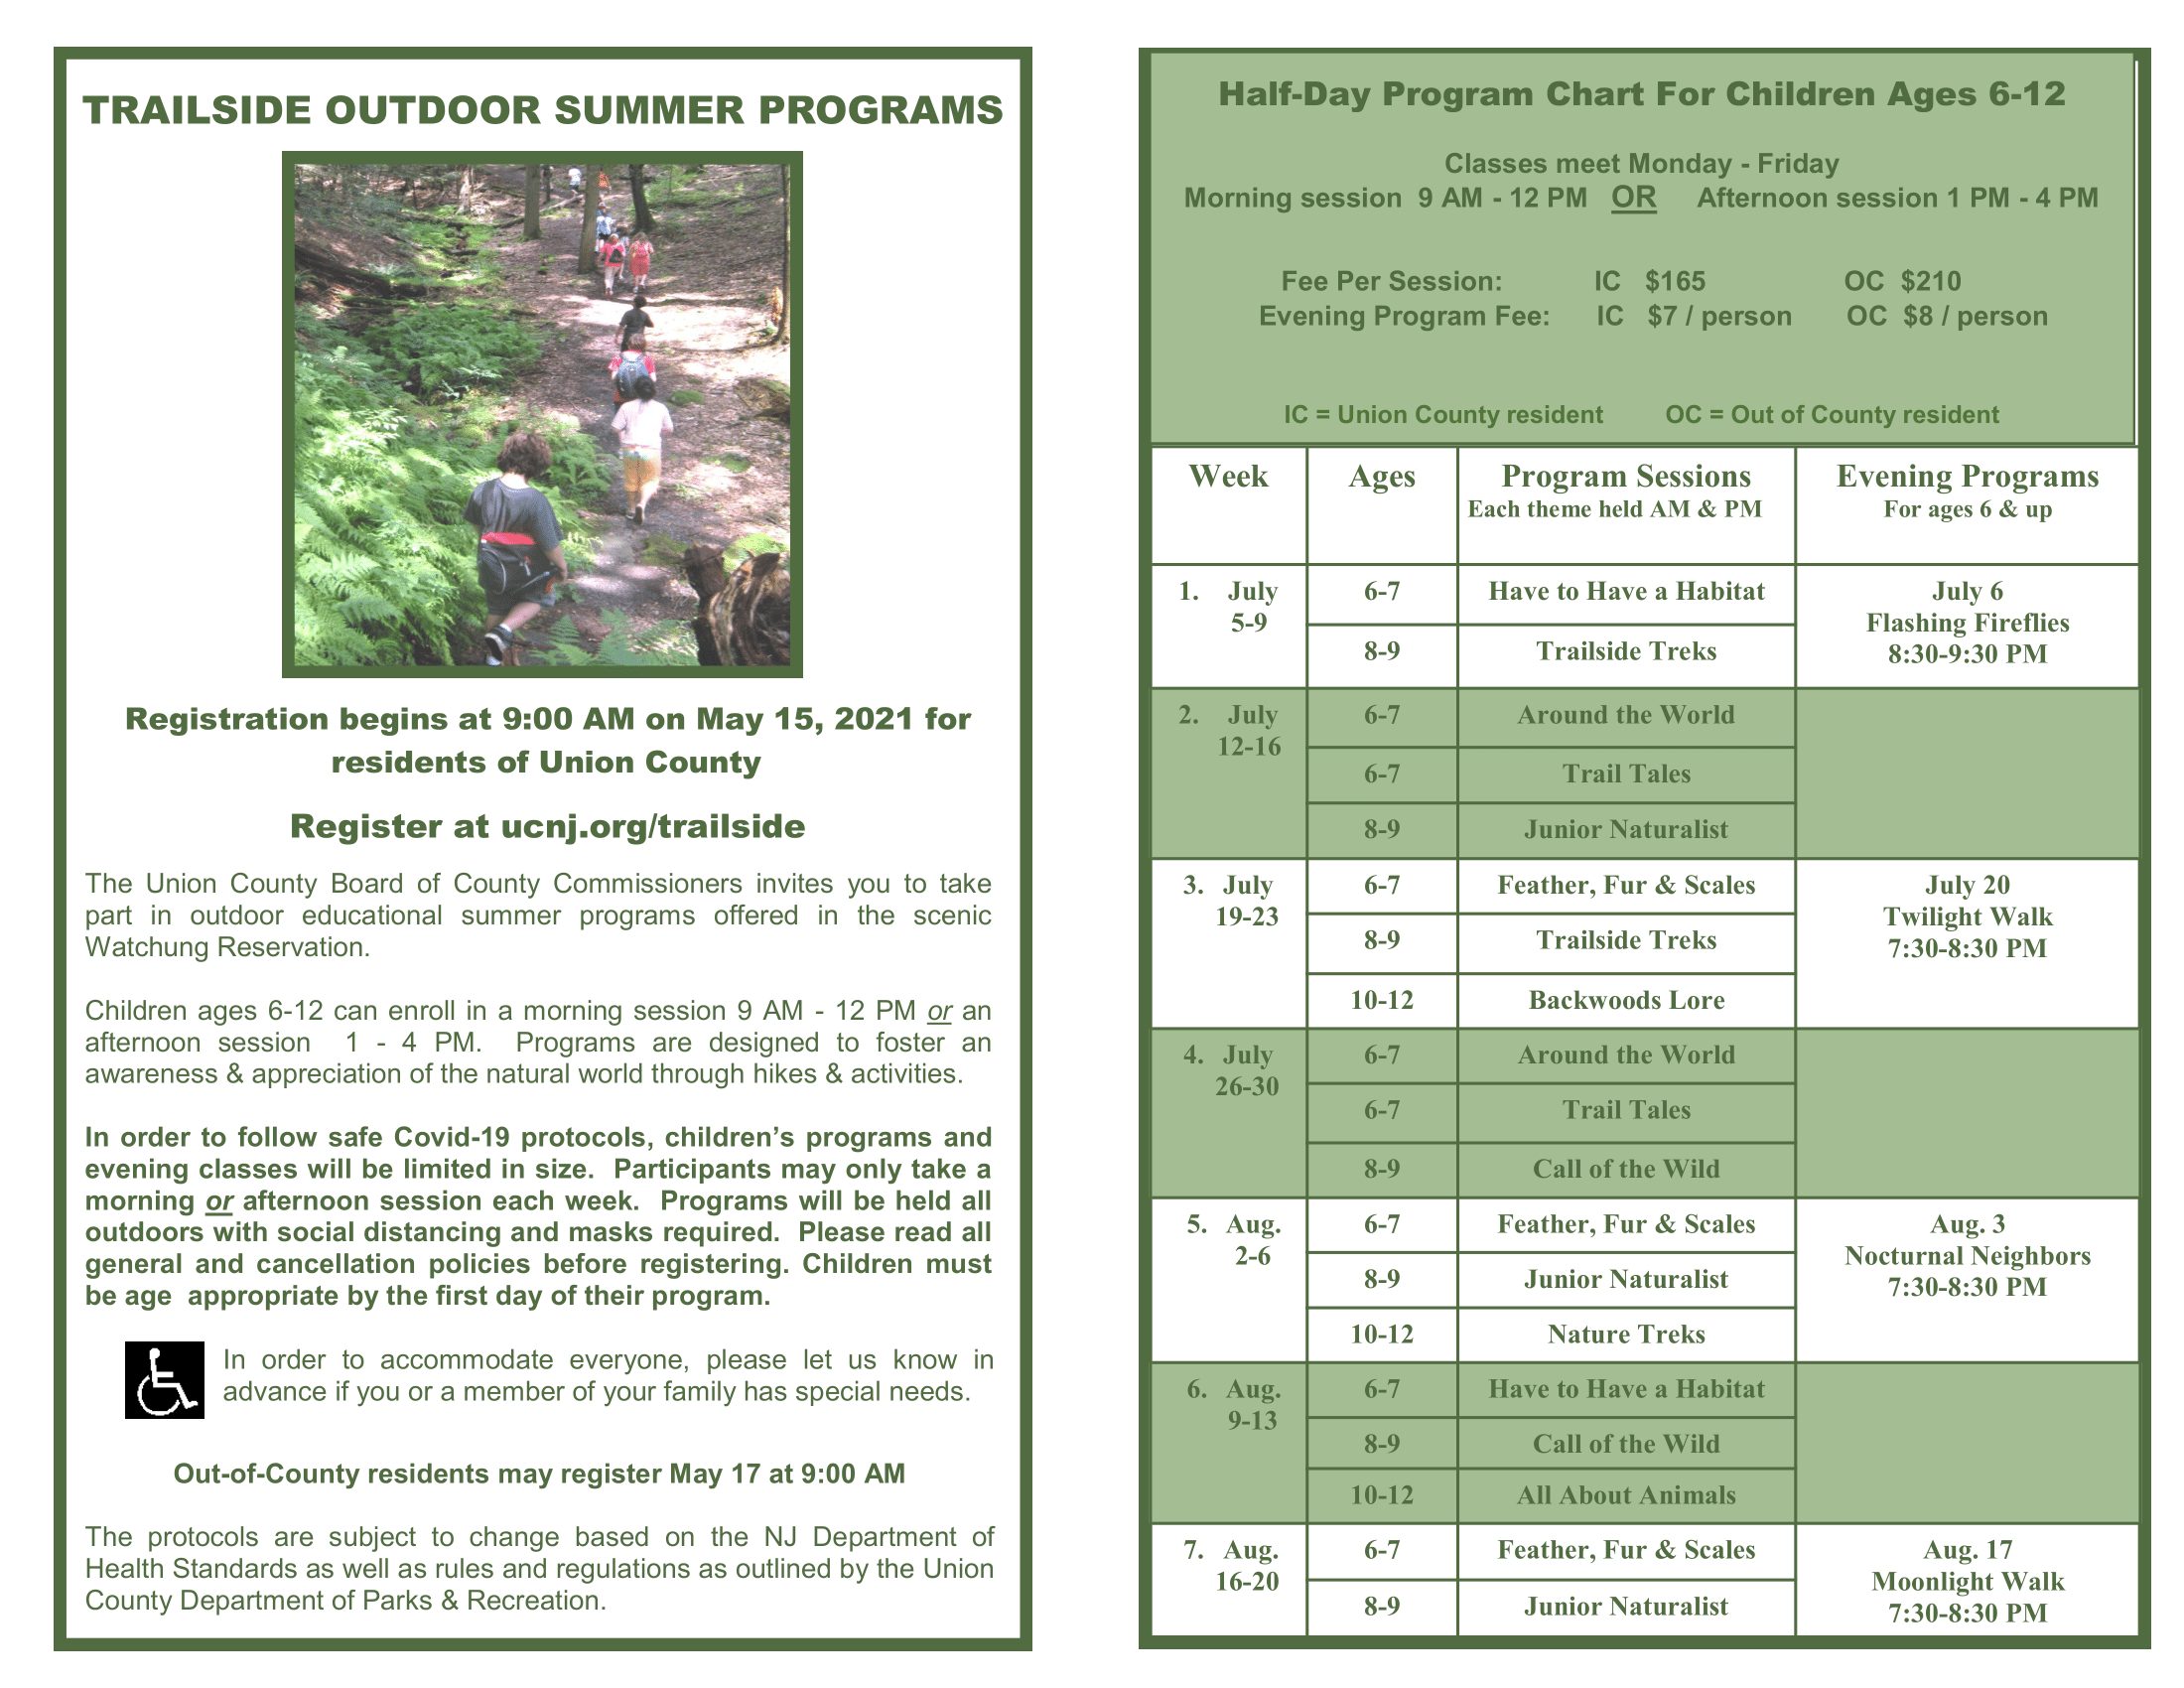 tailside outdoor summer program flyer and half-day chart for children ages 6-12 flyer